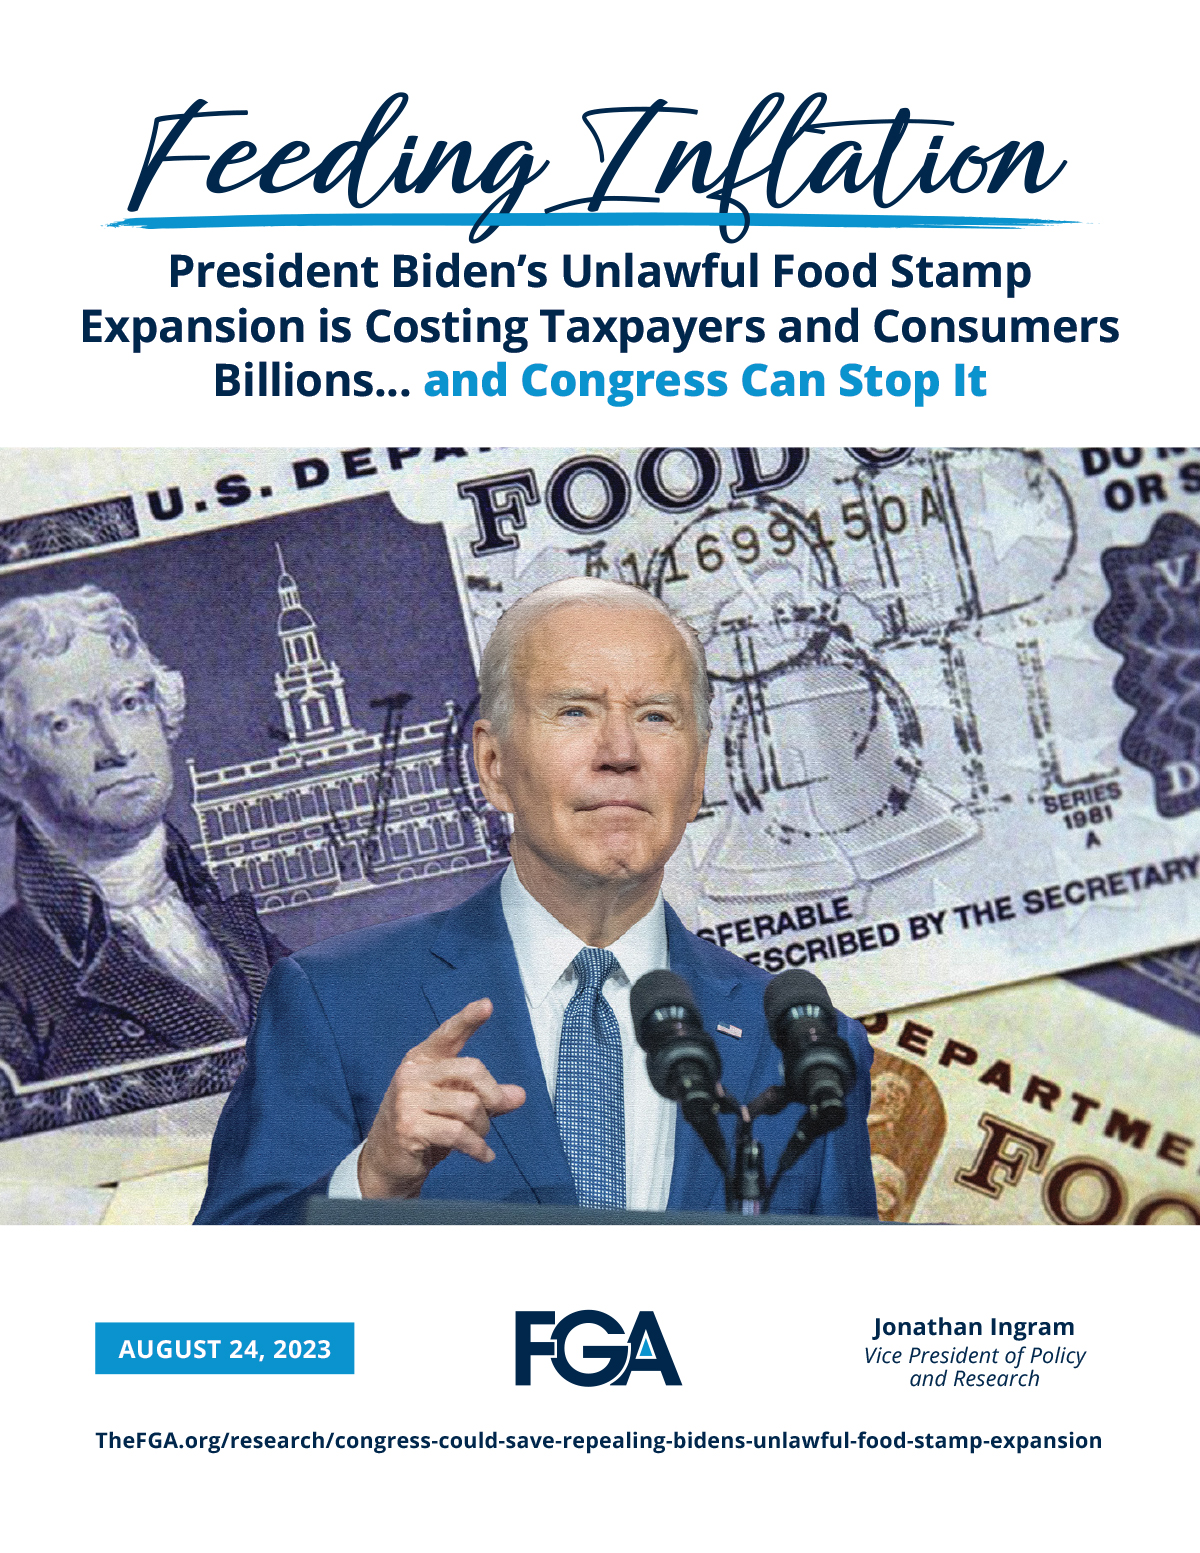 Feeding Inflation: How President Biden’s Unlawful Food Stamp Expansion is Costing Taxpayers and Consumers Billions